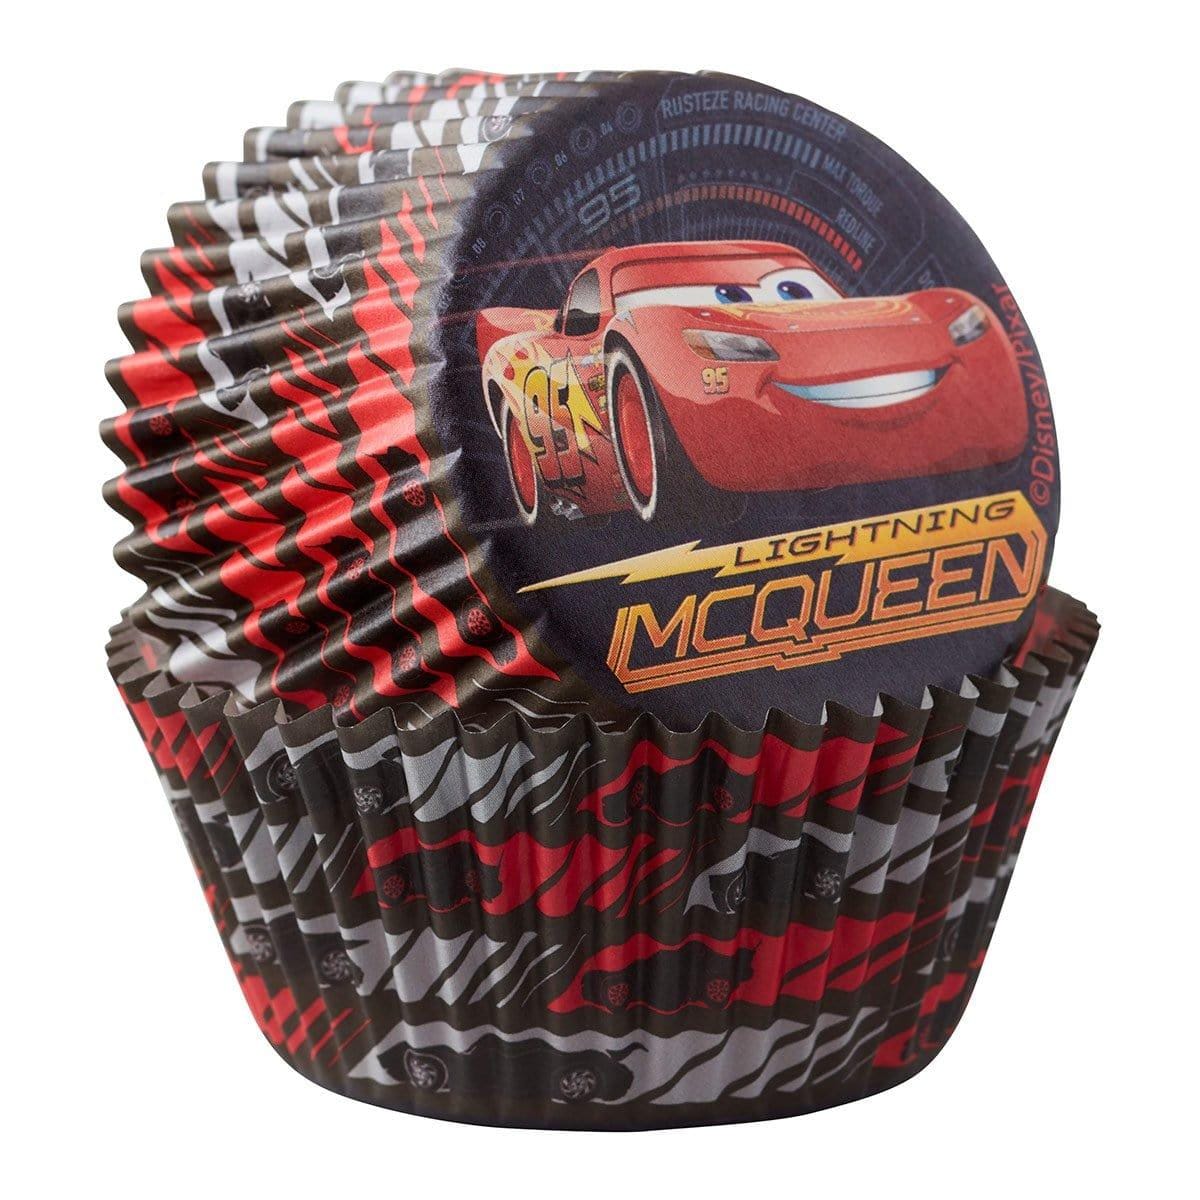 Buy Kids Birthday Cars 3 baking cups, 50 per package sold at Party Expert